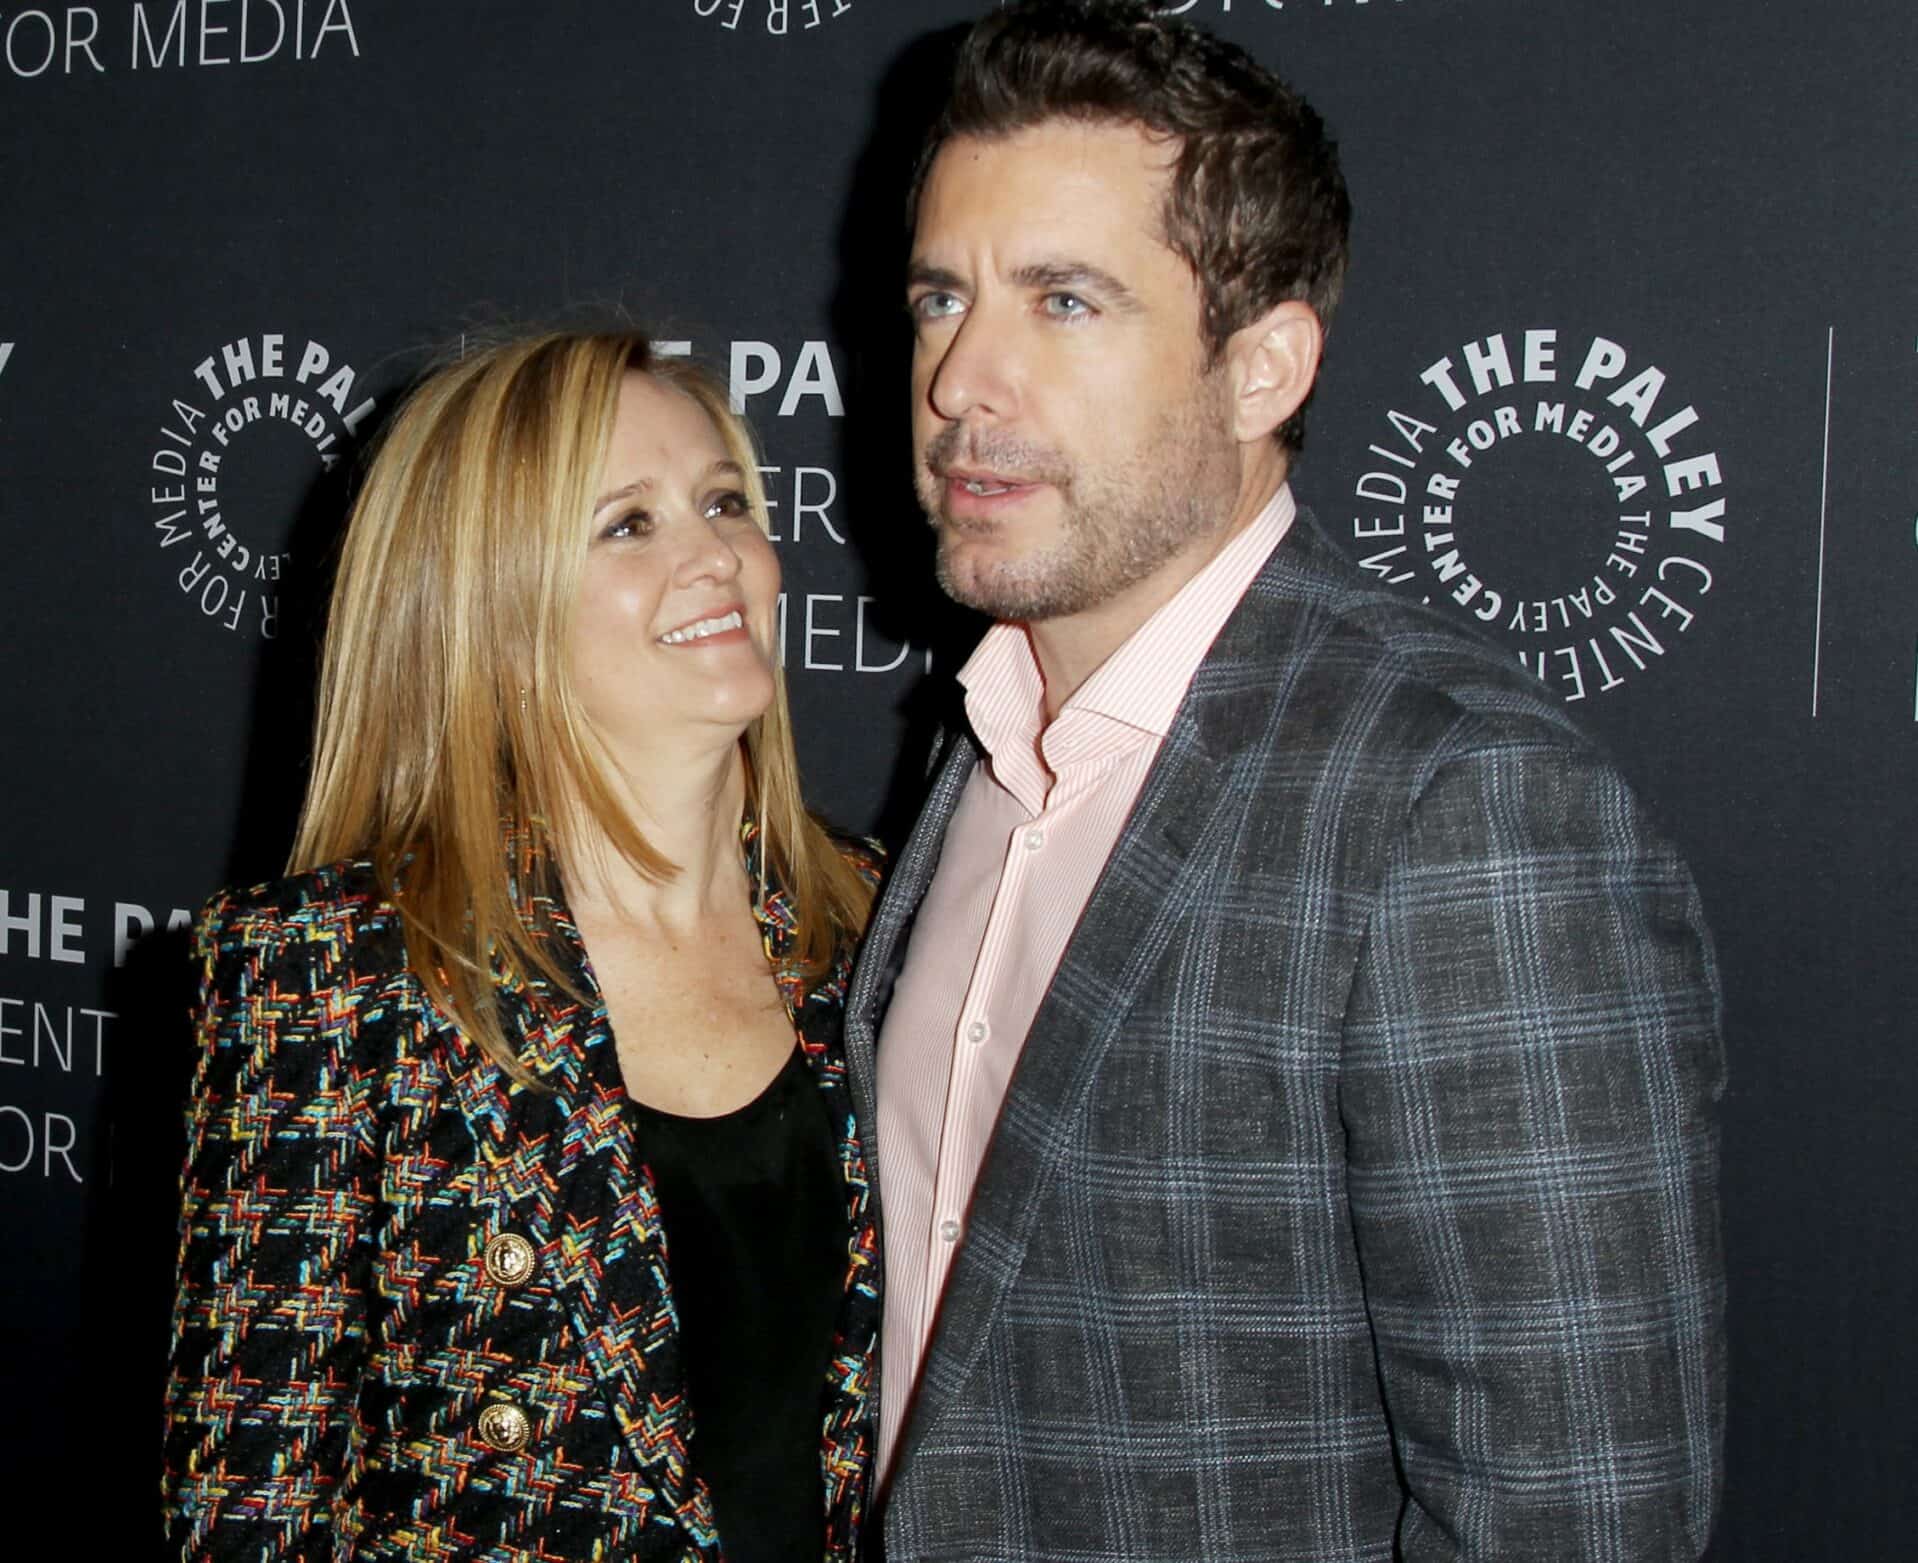 Samantha Bee tied the knot with actor and writer Jason Jones in 2001